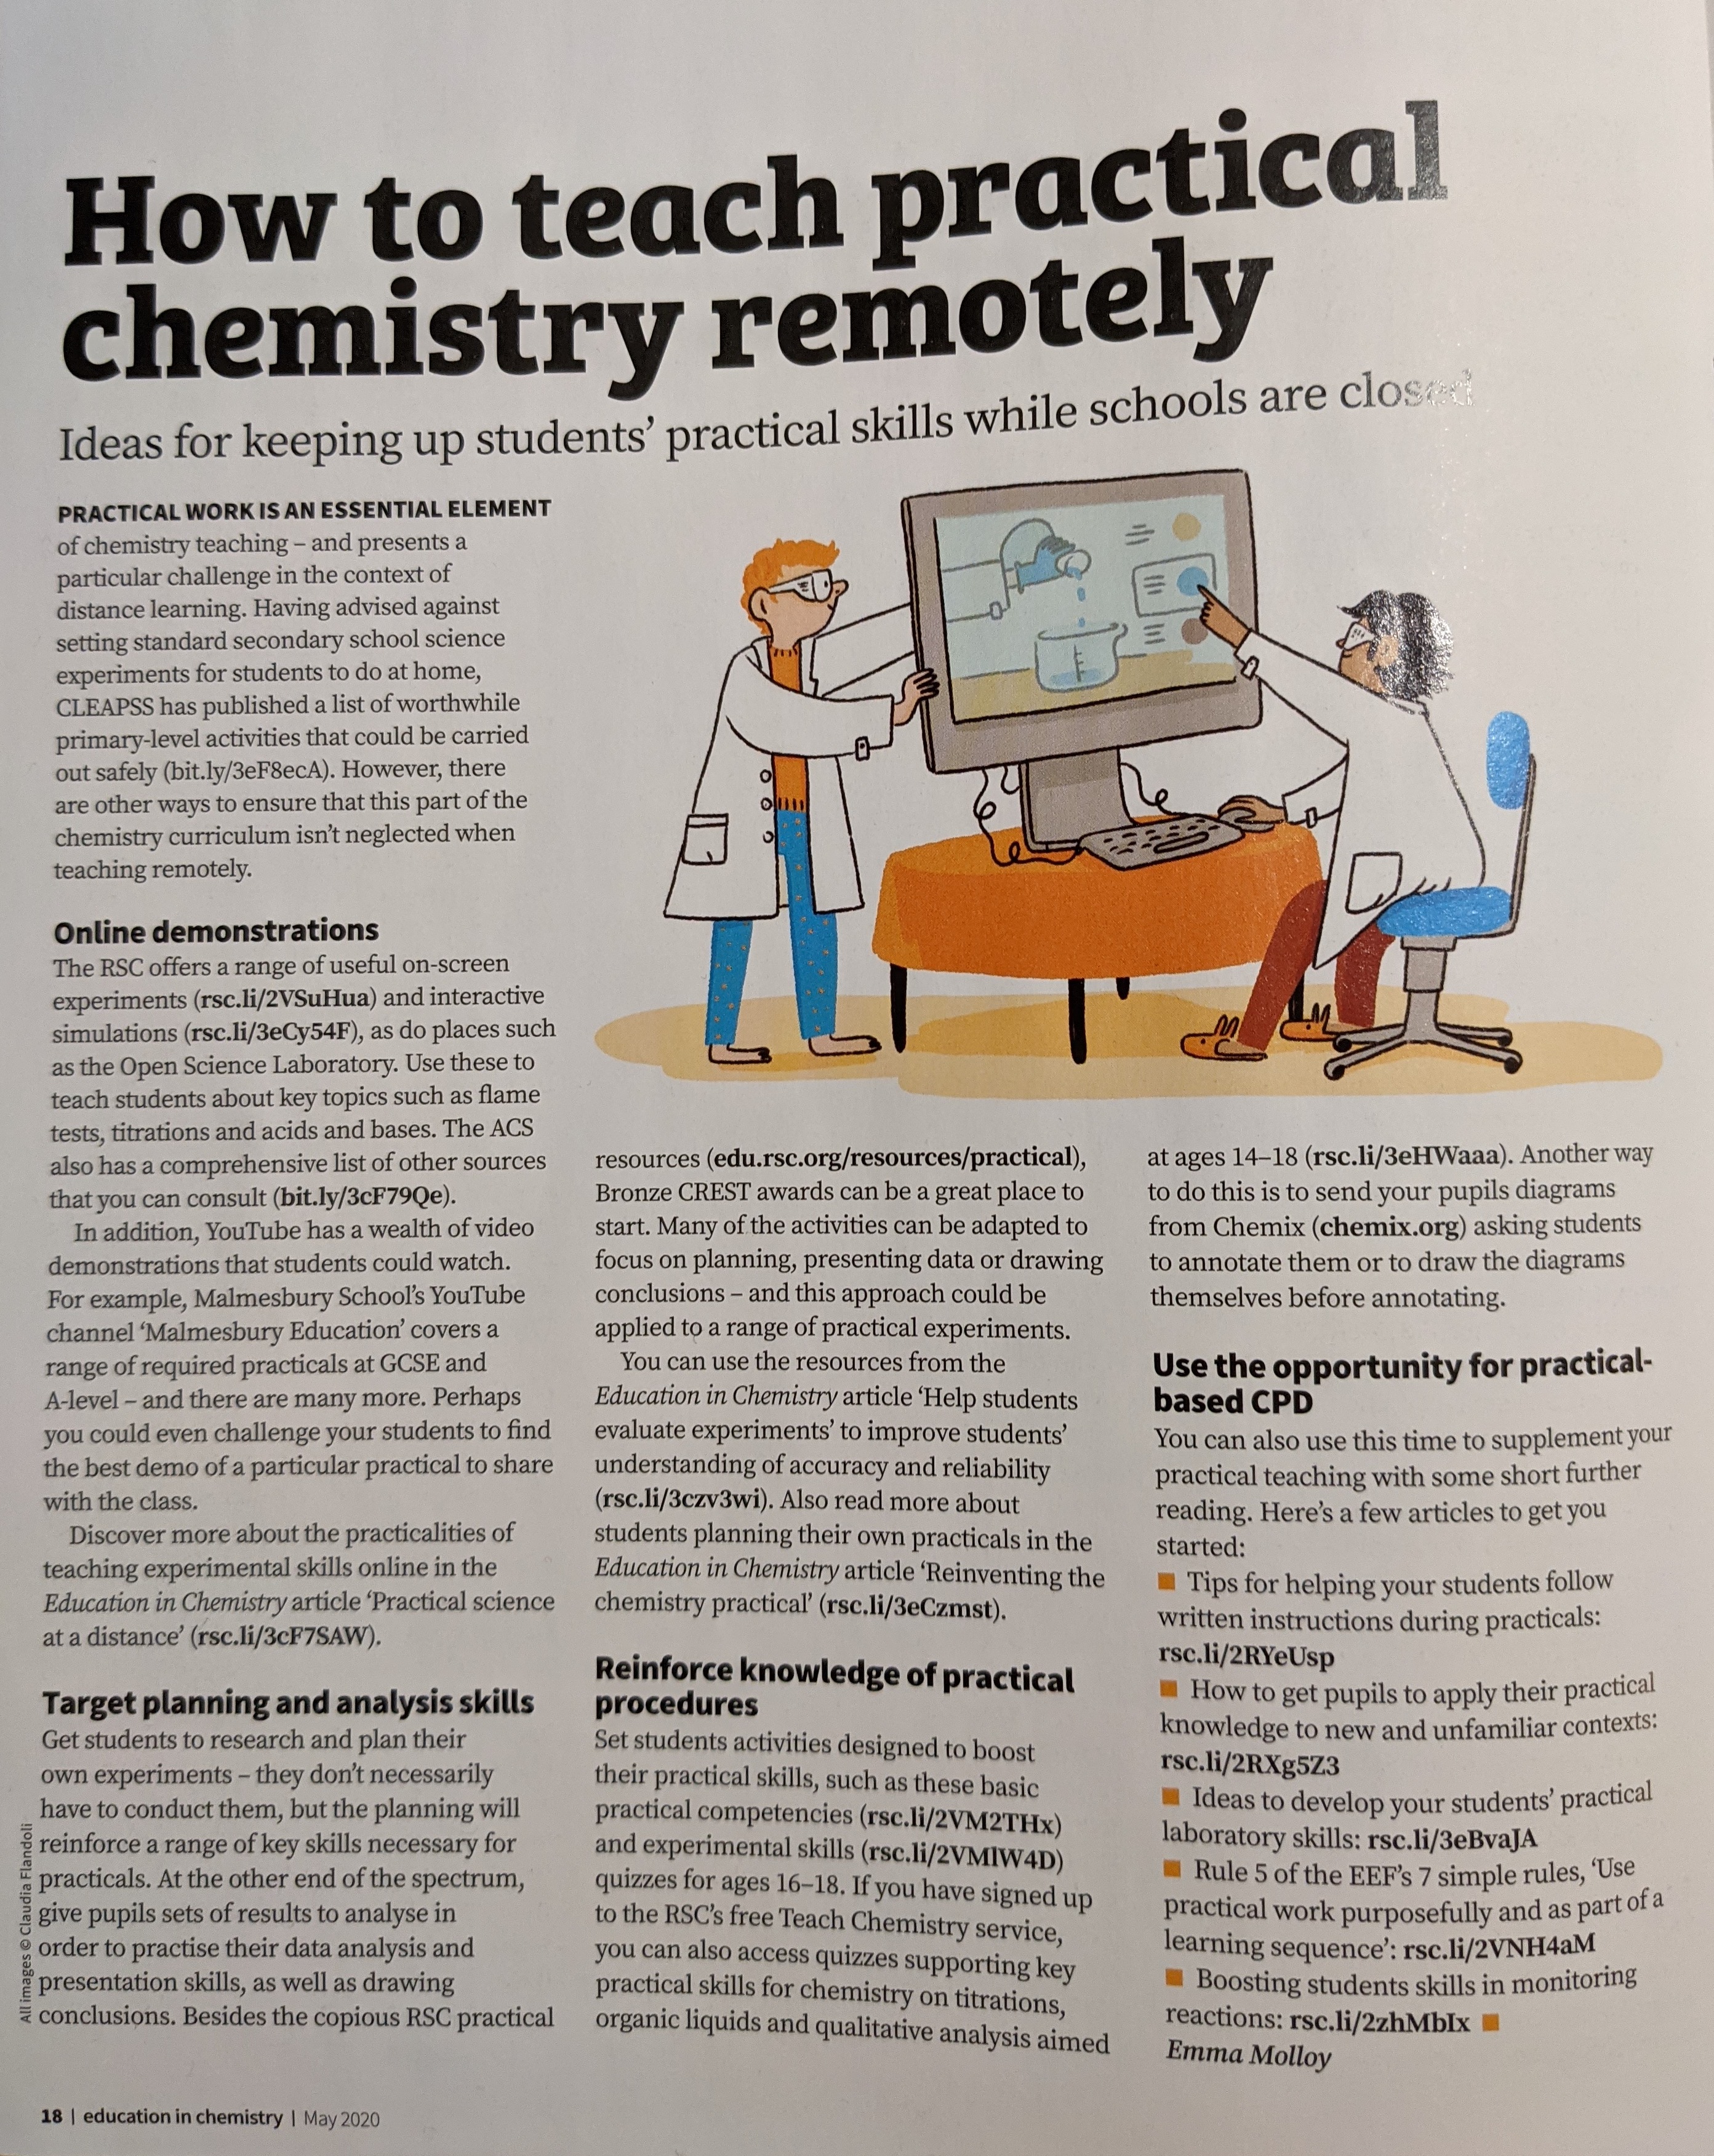 How to teach practical chemistry article in Education in Chemistry magazine from the Royal Society of Chemistry